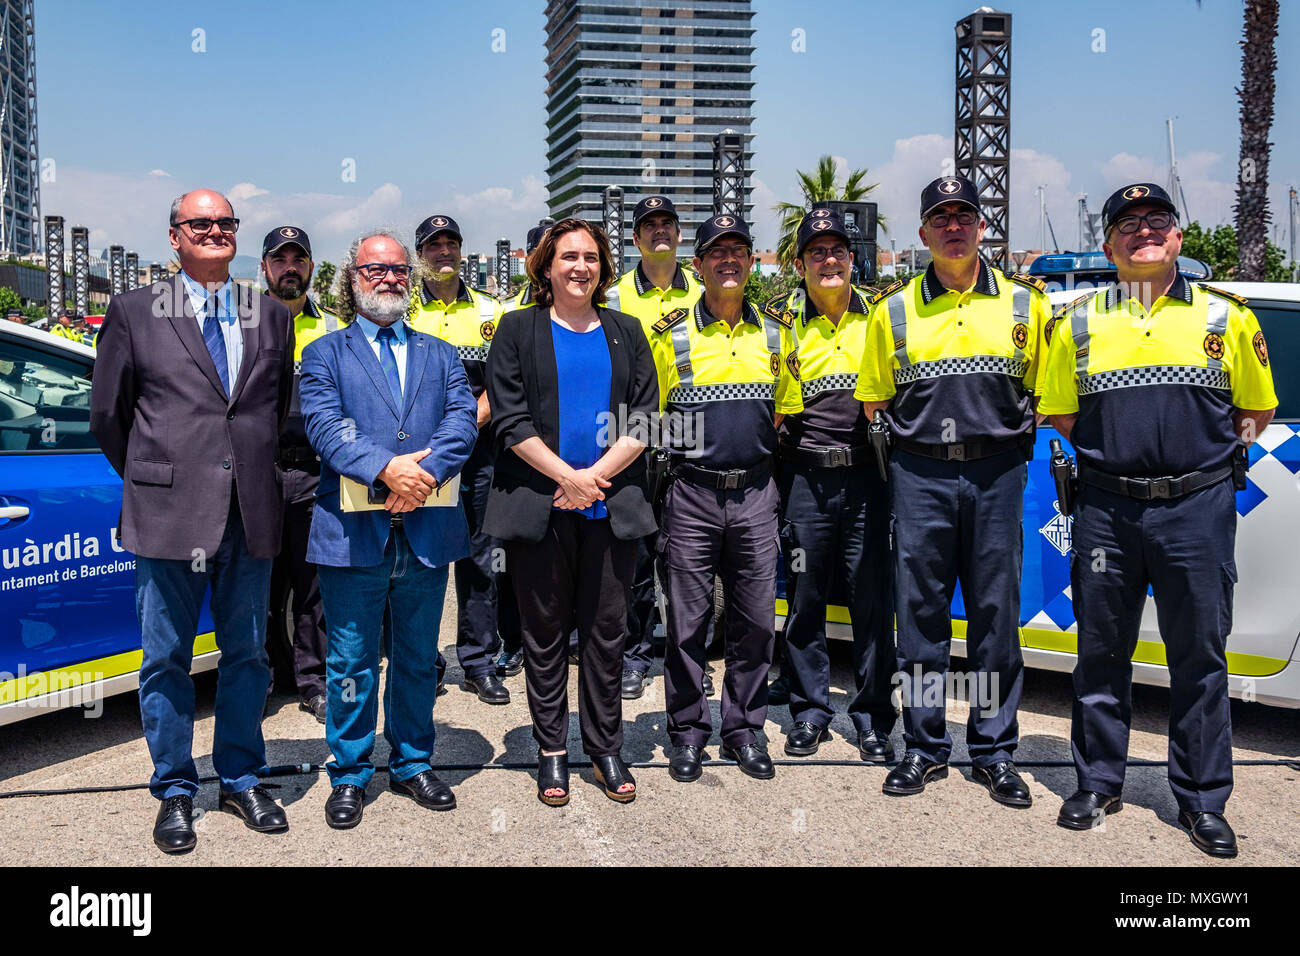 Barcelona, Catalonia, Spain. 4th June, 2018. Mayor Ada Colau and the security commissioner Amadeu Recasens are seen in a group photo with the urban guard of Barcelona. With the presence of Mayor Ada Colau and the security commissioner Amadeu Recasens, the presentation of the new patrol vehicle fleet of the Guardia Urbana de Barcelona Police has taken place. The investment was 12.6 million euros. The new vehicles with a hybrid system allow a fuel saving of 608 euros per vehicle per year. These new cars are equipped with new communication technology and cameras with license plate recognition. L Stock Photo